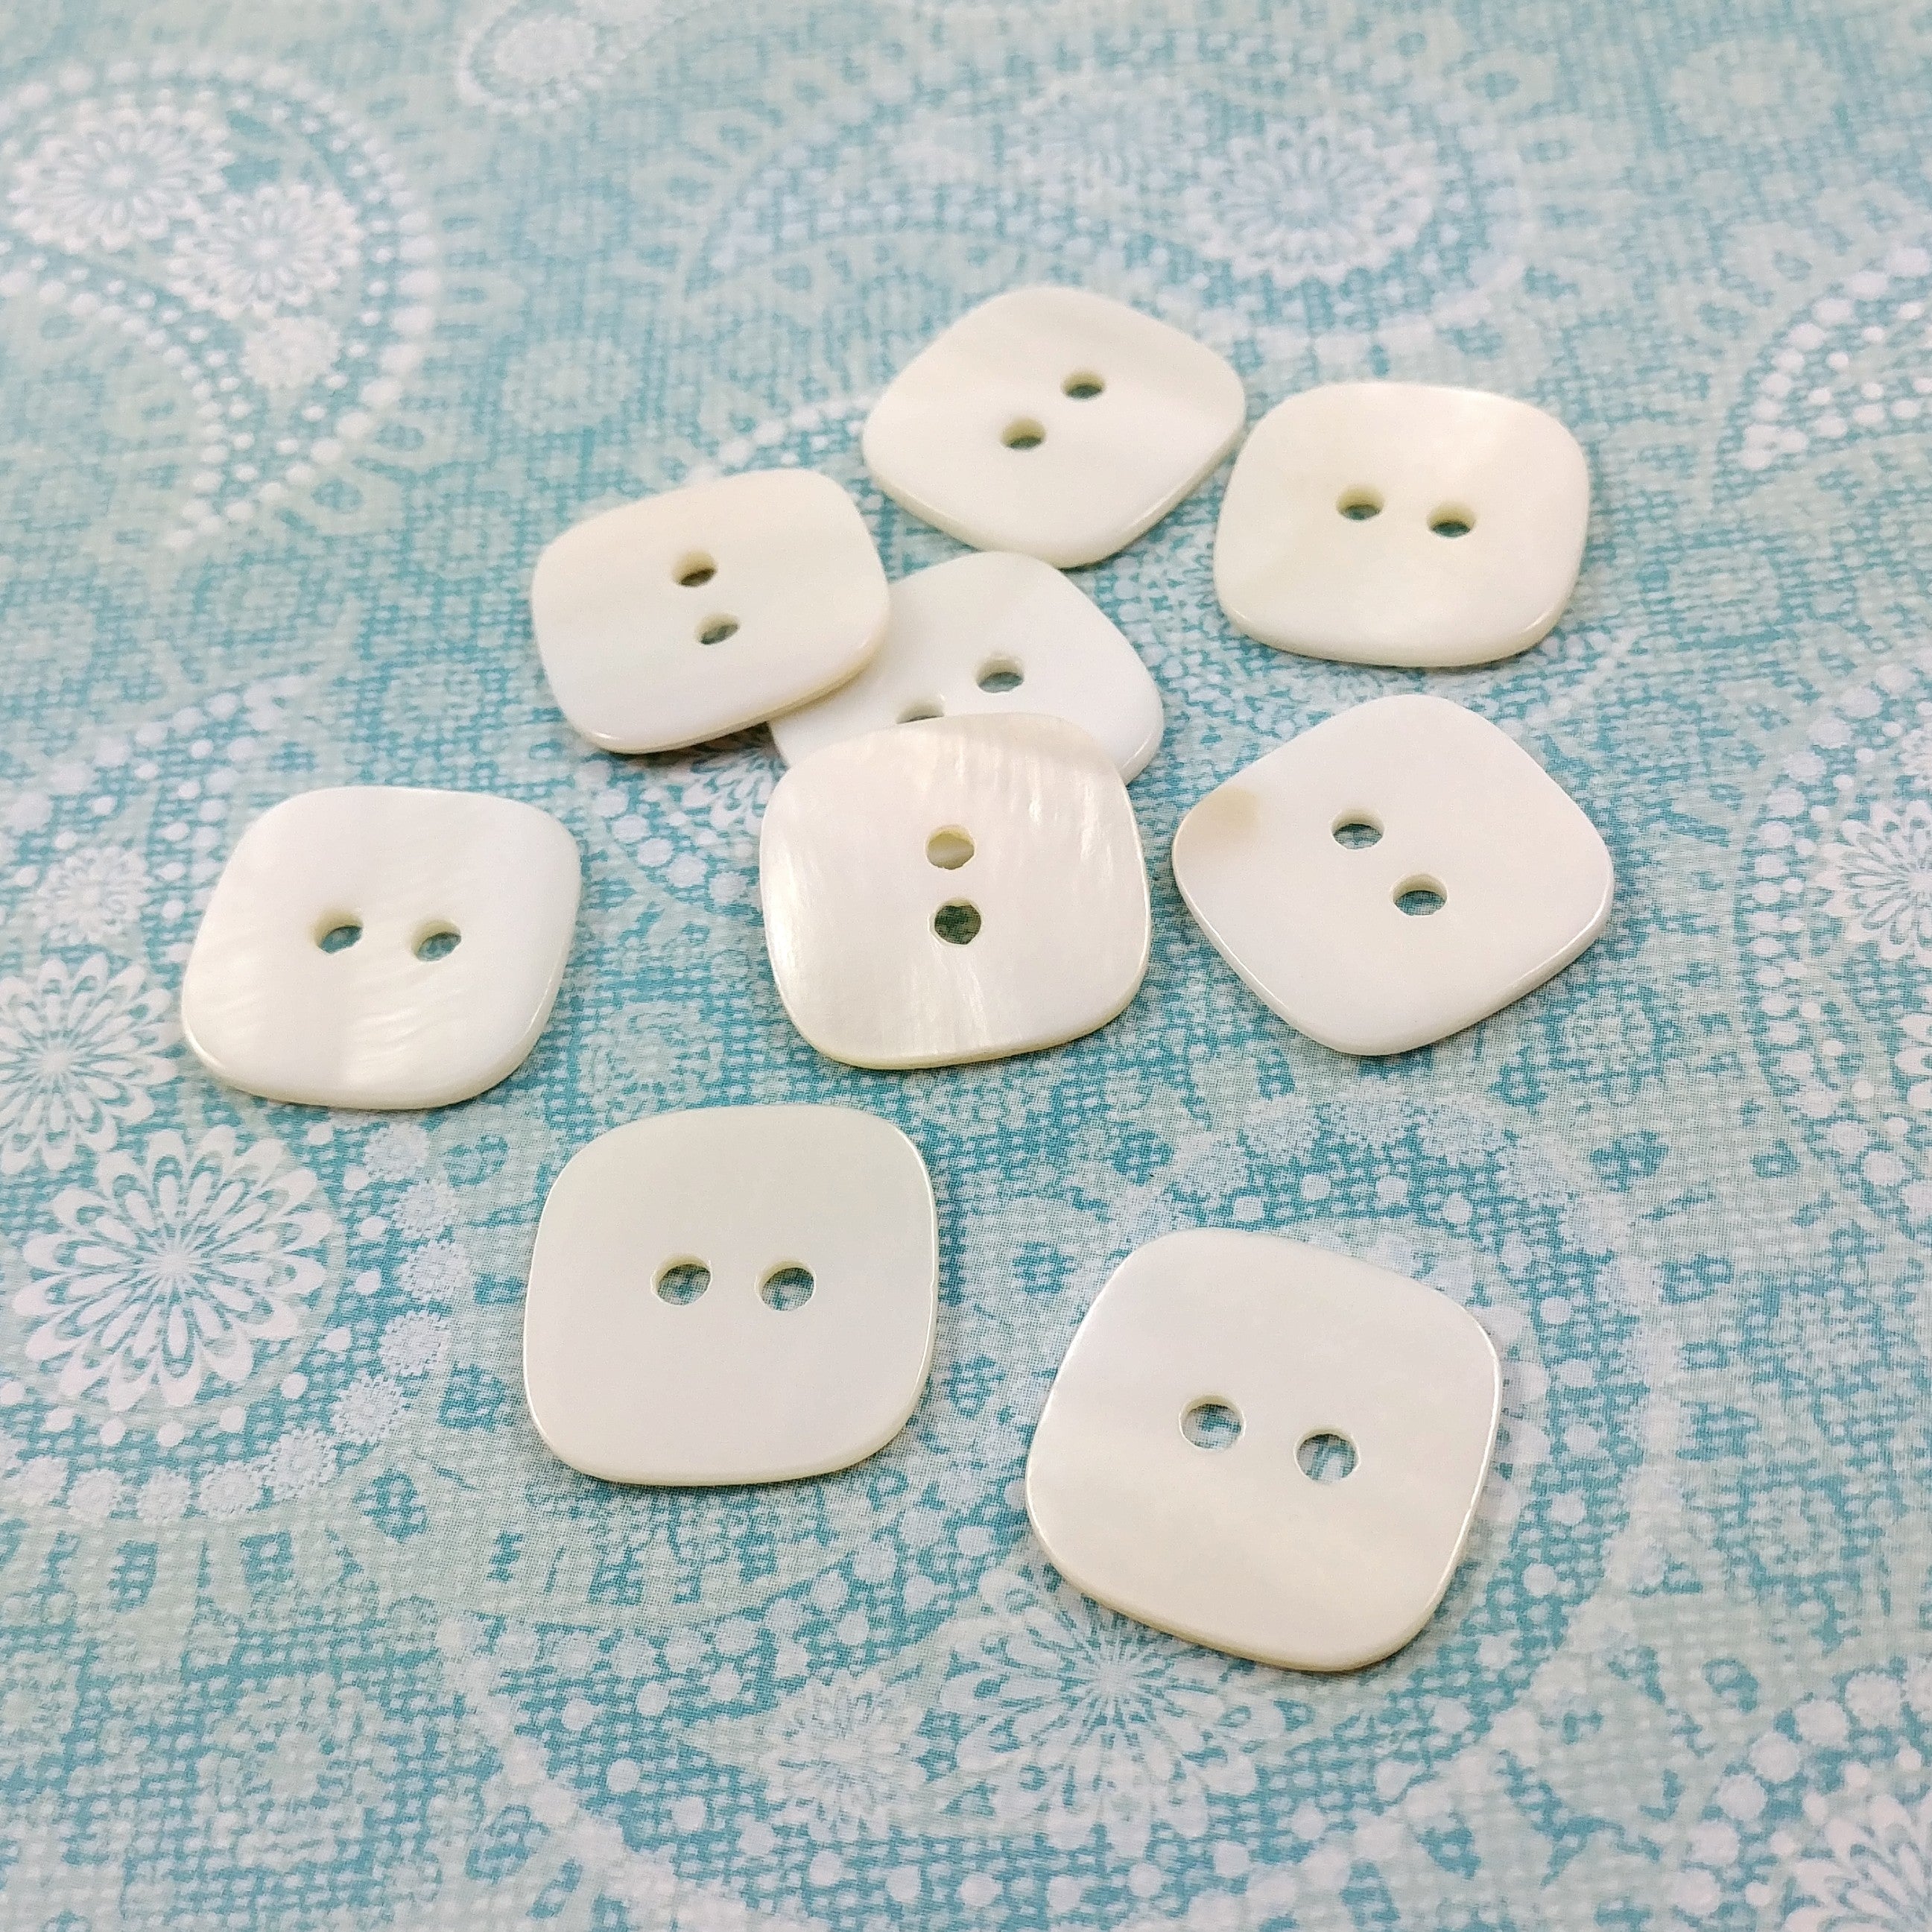 LUXURY MOTHER OF PEARL BUTTONS -10mm,15mm, 18mm, 20mm, 25mm, 30mm-NATURAL,  SHELL